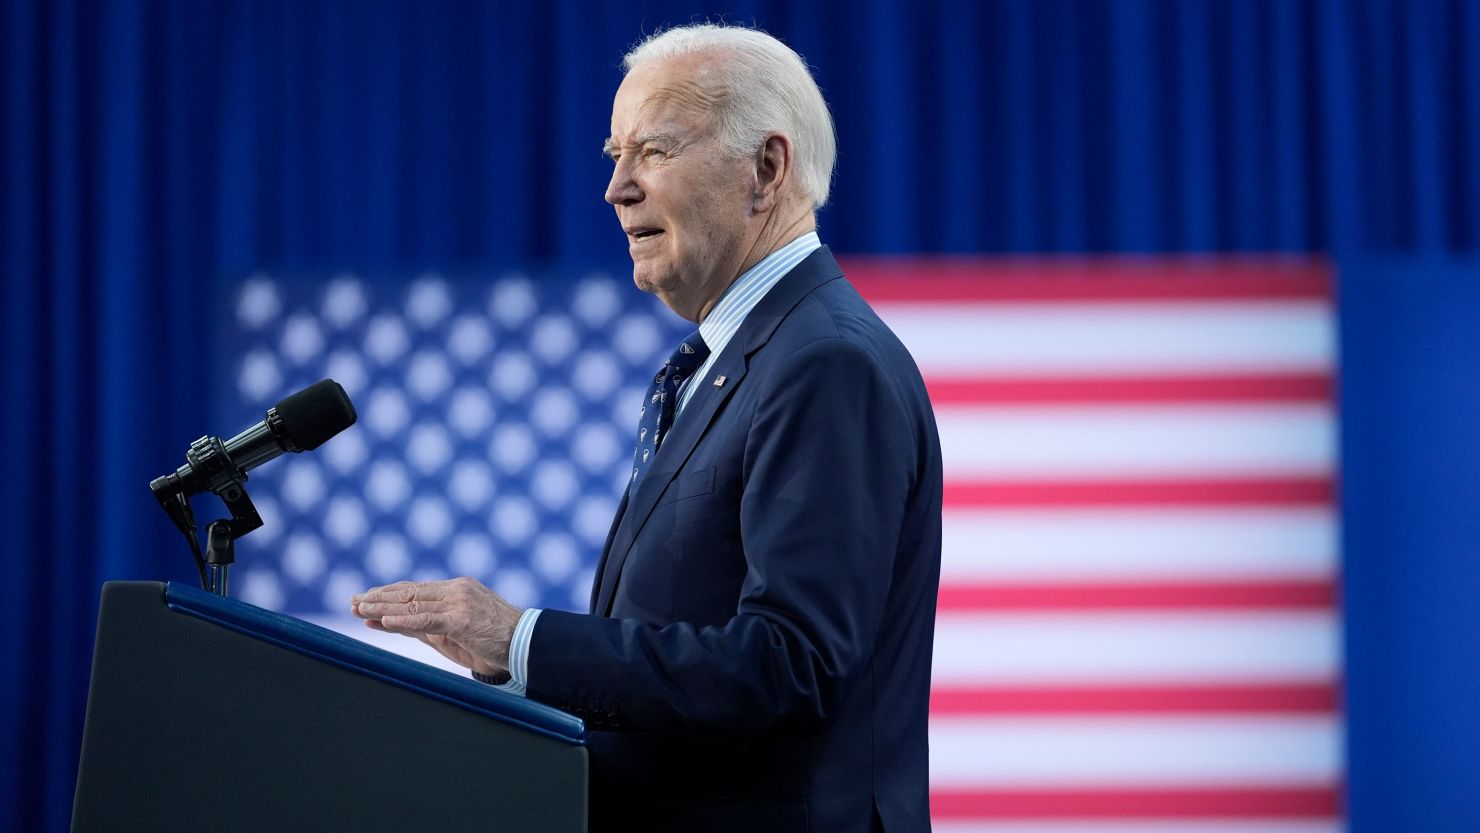 The Biden administration gave approval to Chinese carriers to make 50 weekly round trips to and from the United States, up from 35 previously, from March 31.